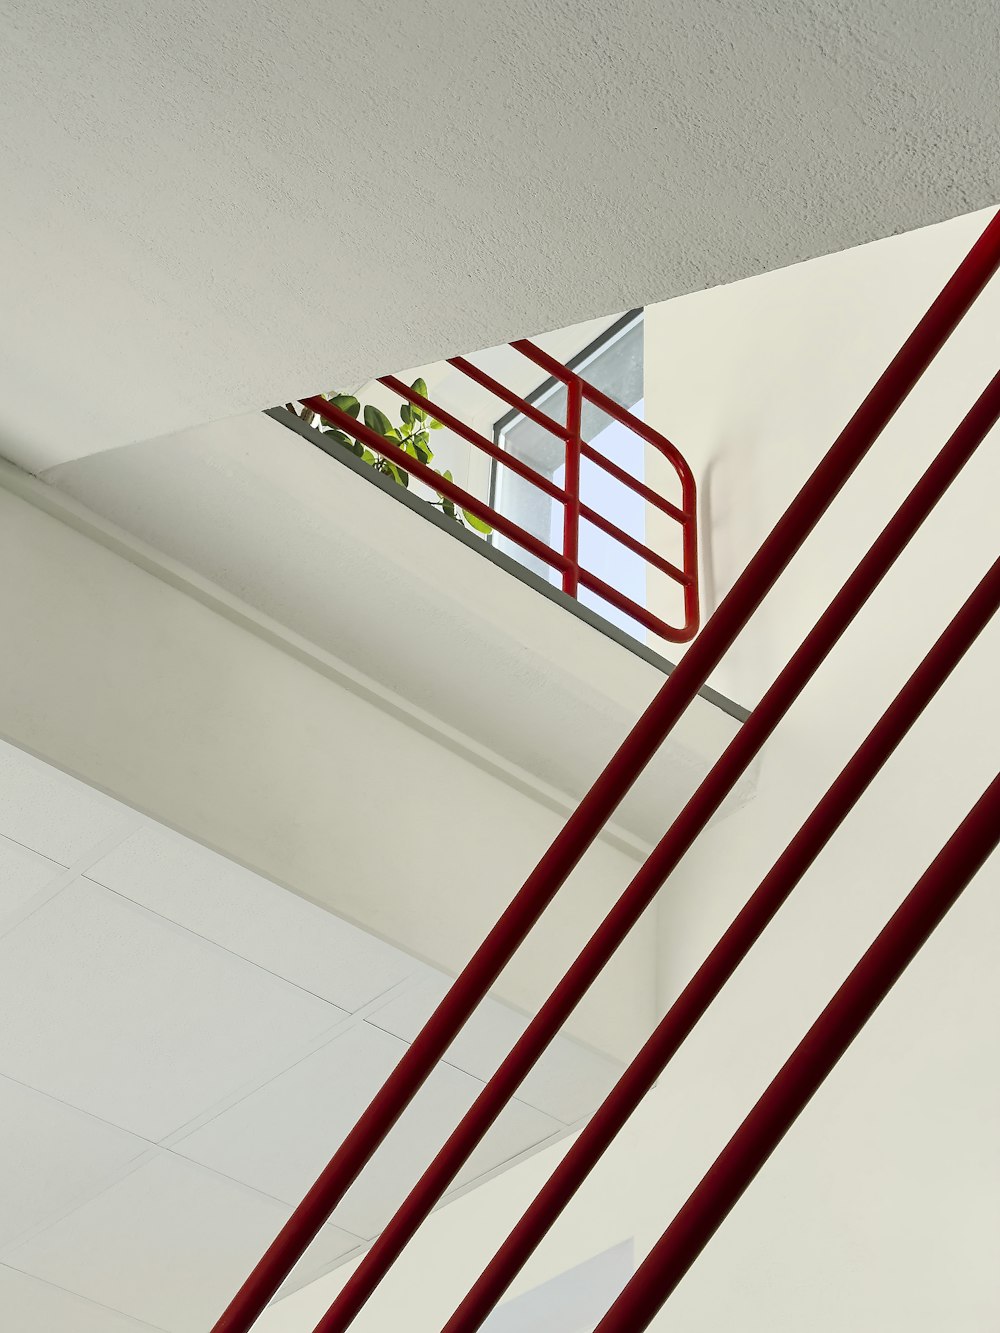 a red ladder hanging from the side of a building